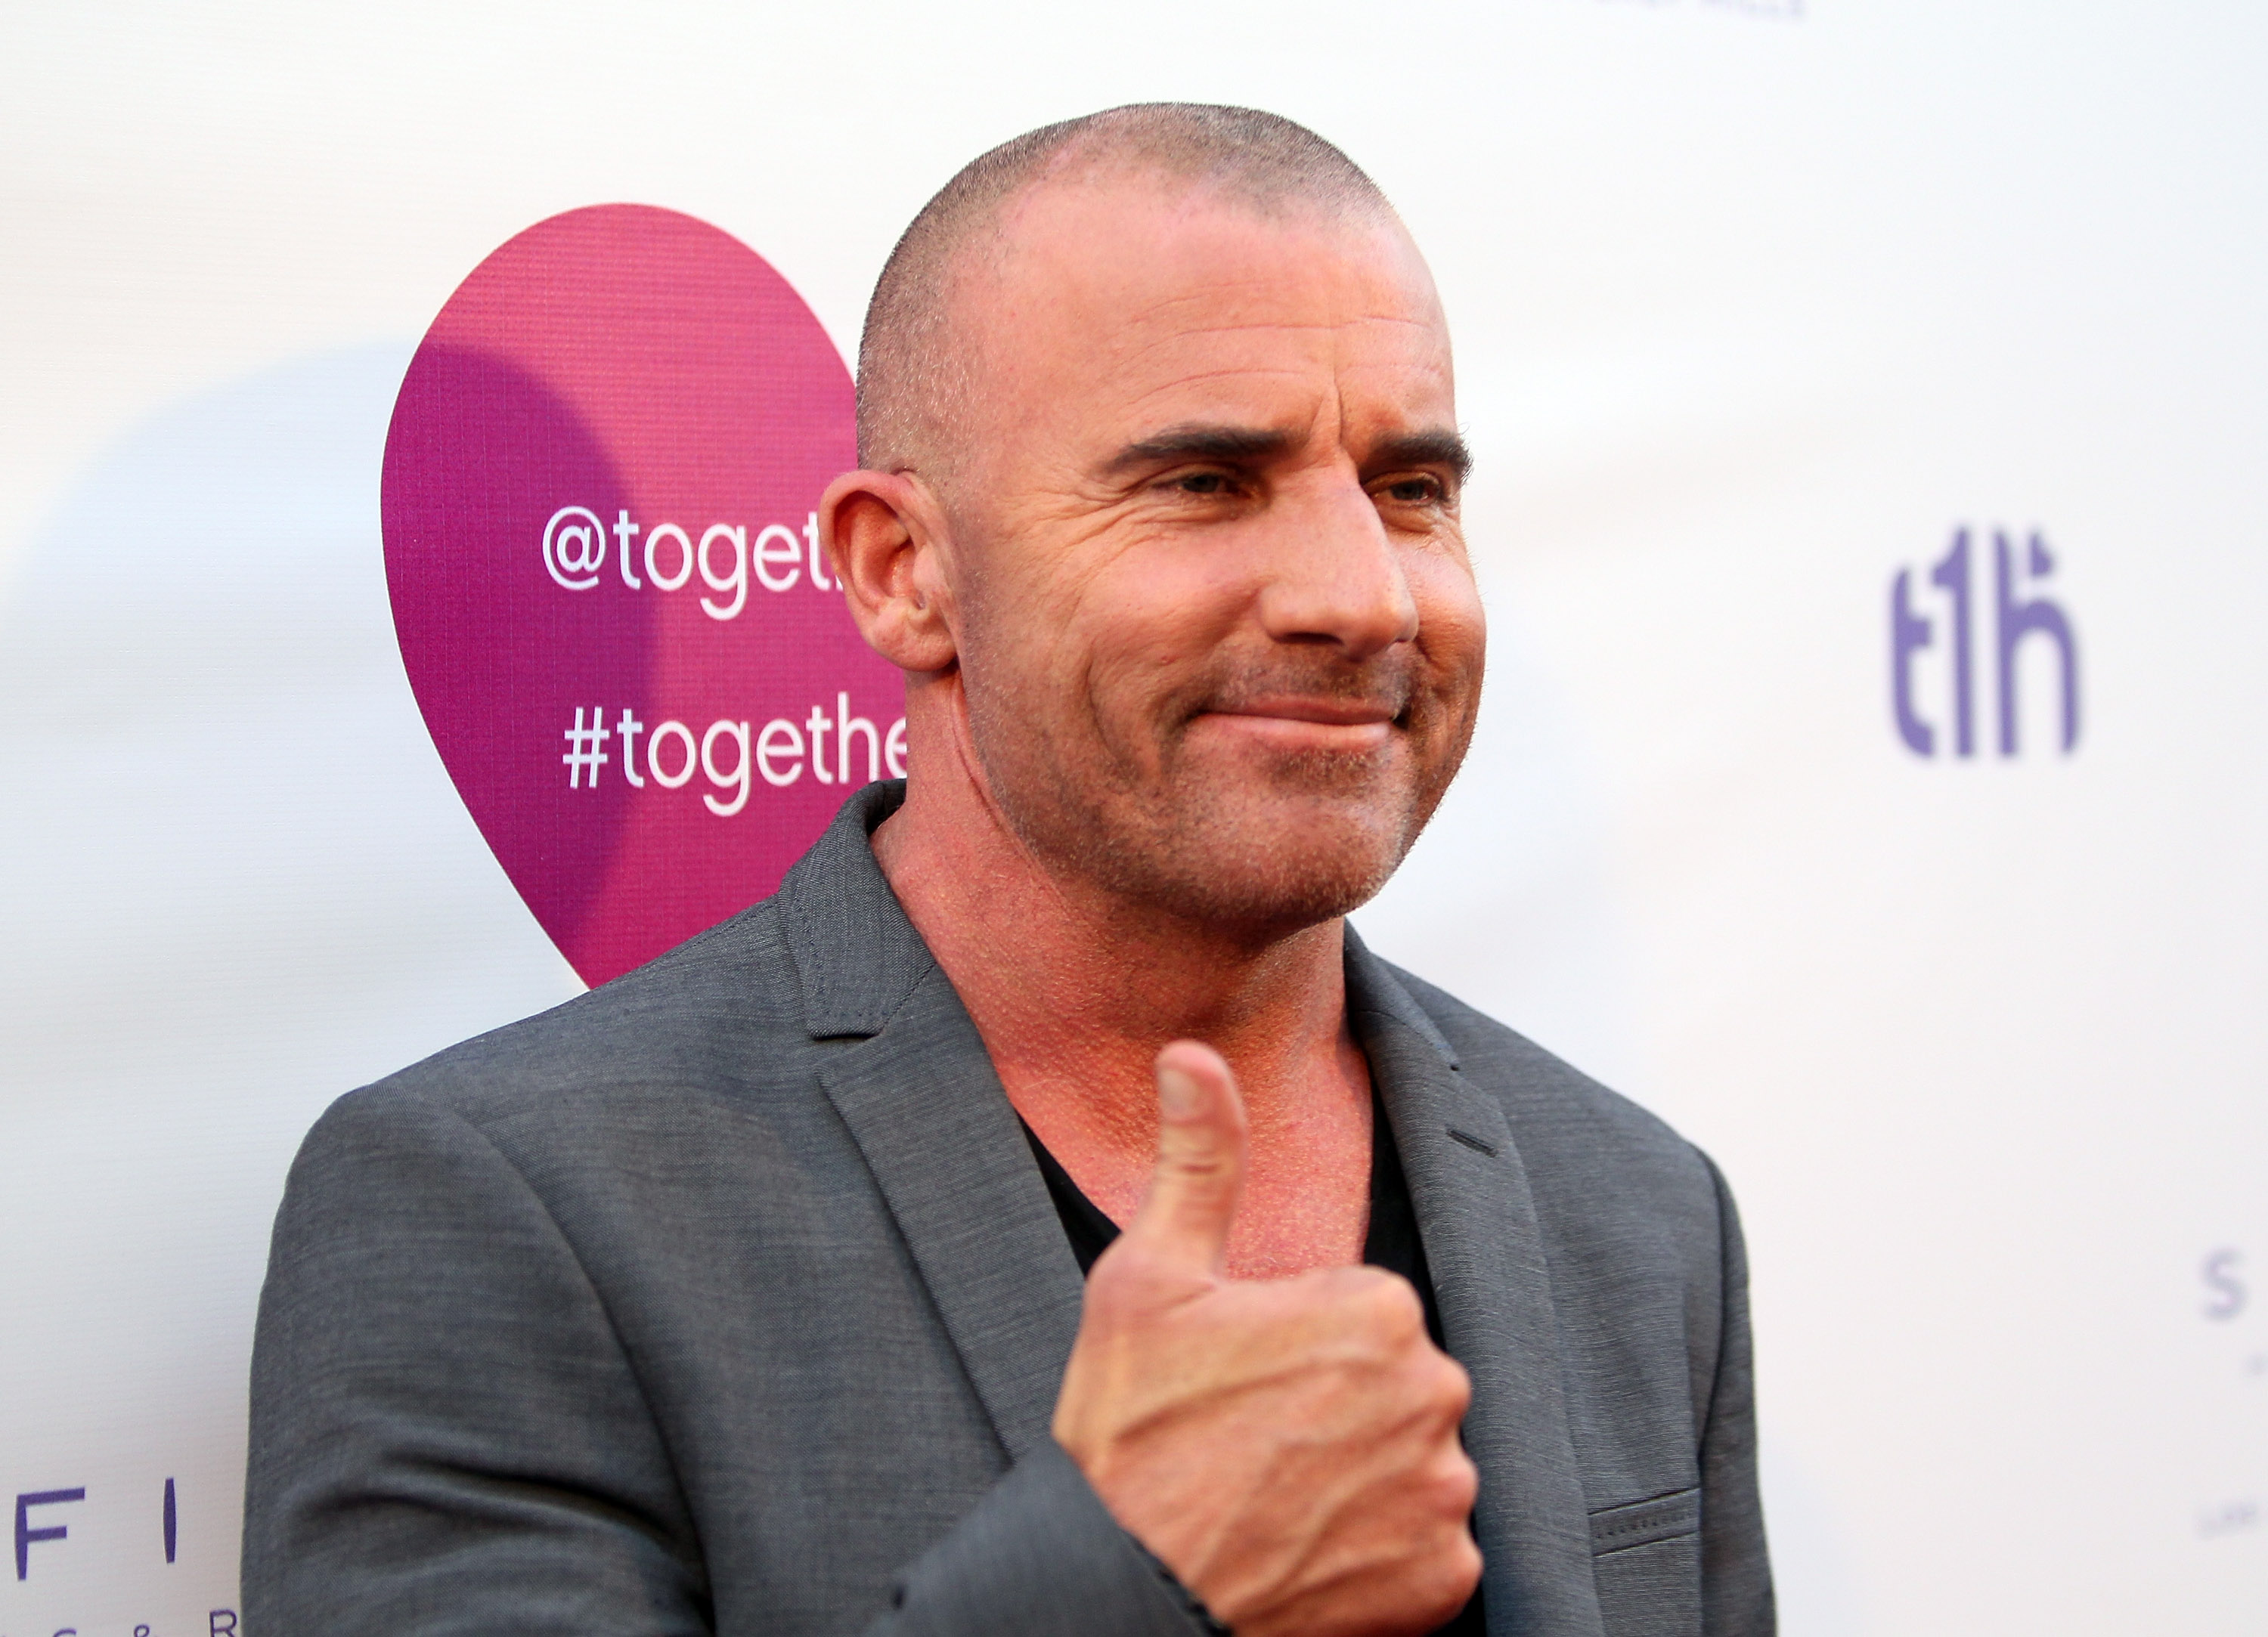 Dominic Purcell attends together1heart launch party hosted by AnnaLynne McCord at Sofitel Hotel on June 25, 2016, in Los Angeles, California. | Source: Getty Images